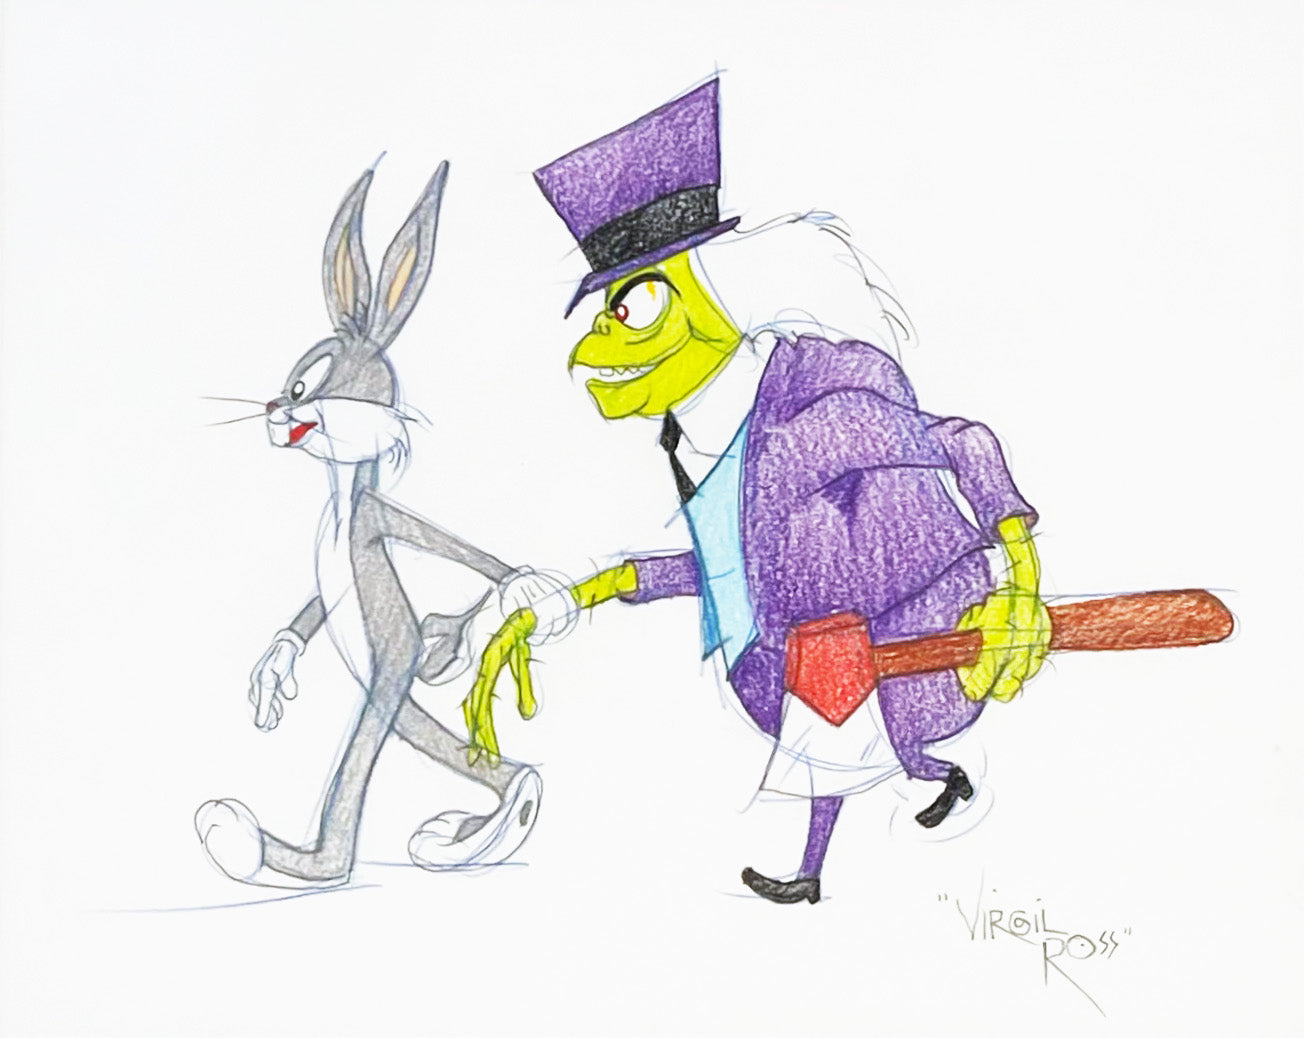 Original Warner Brothers Virgil Ross Animation Drawing featuring Bugs Bunny and Mr. Hyde